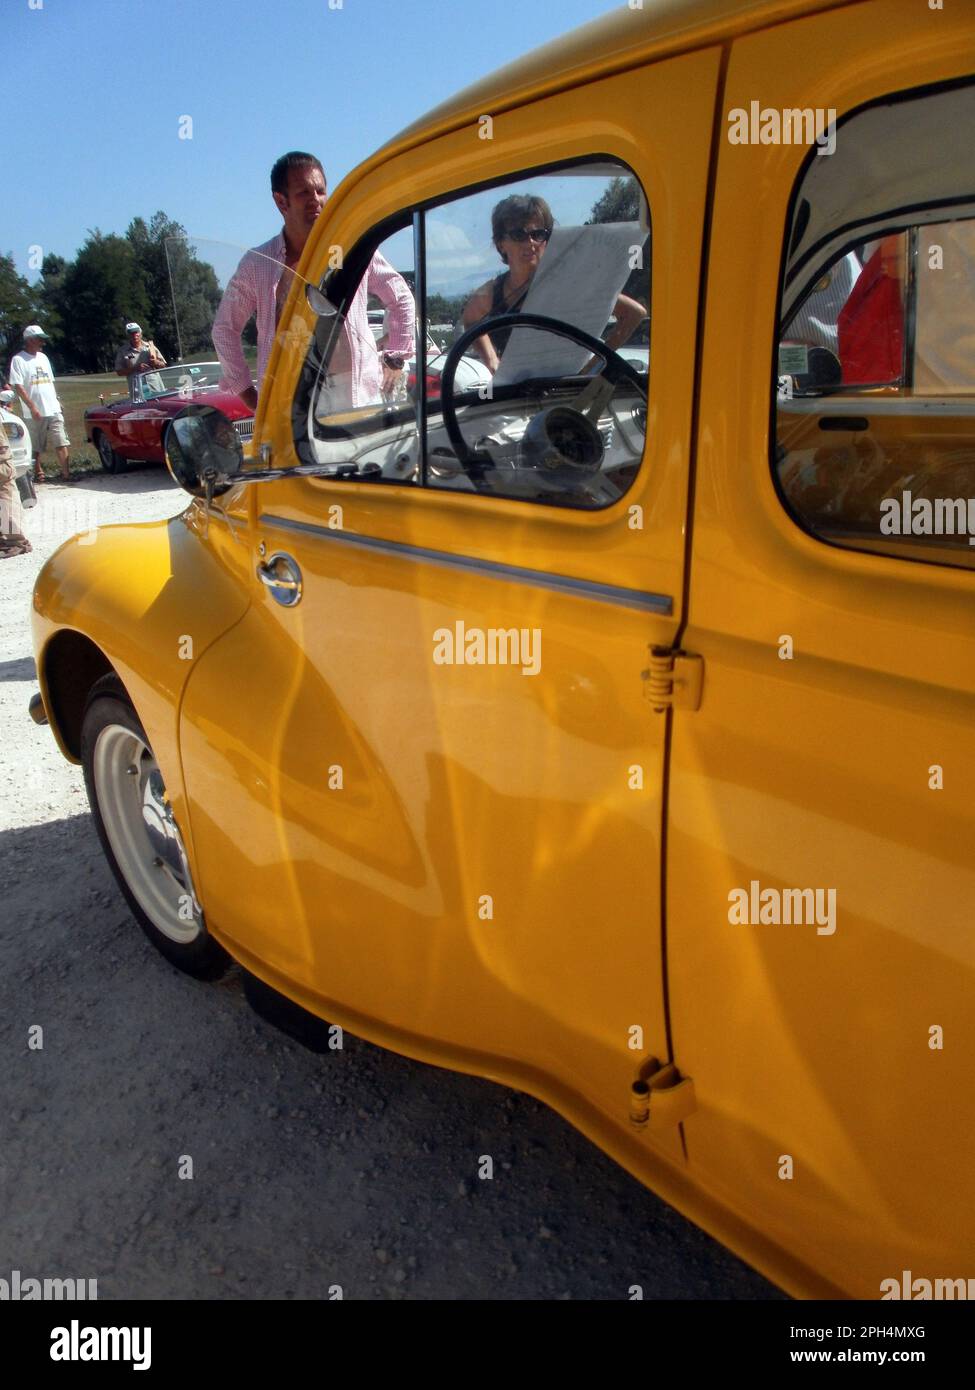 Le Bourget du lac, France - August 19th 2012 : Public exhibition of classic cars. Interior of a yellow Renault 4CV grand luxe. Stock Photo